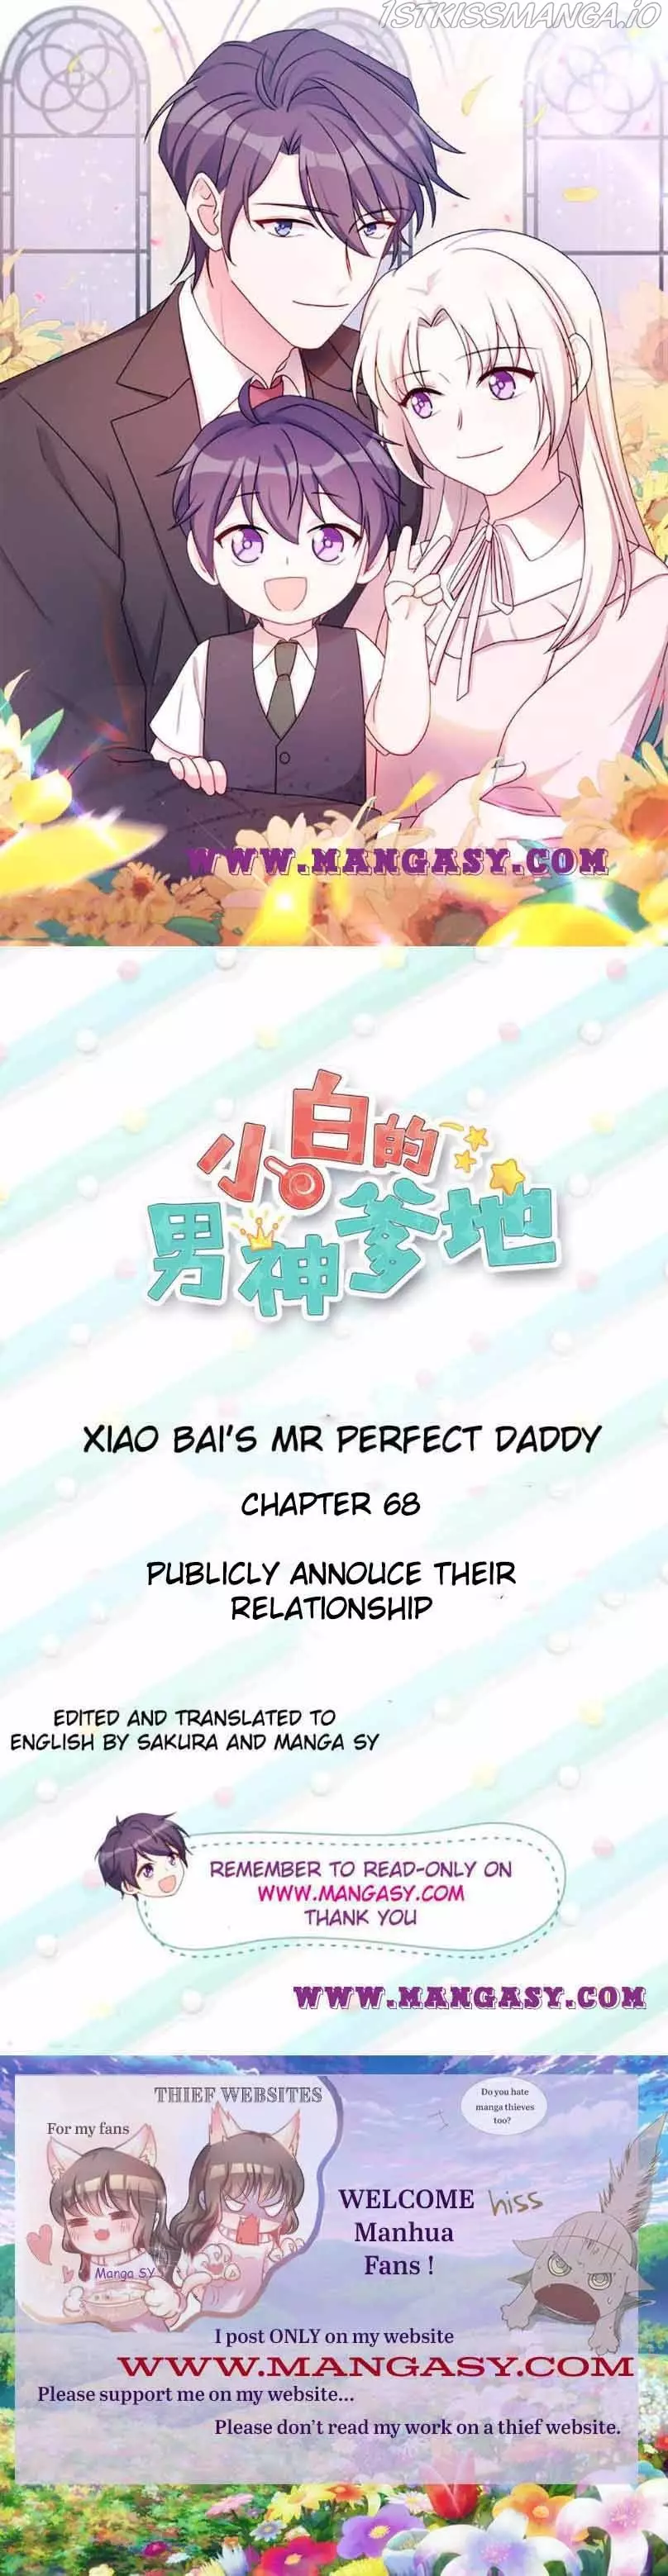 Xiao Bai’S Father Is A Wonderful Person - 68 page 1-9ce9a9cf